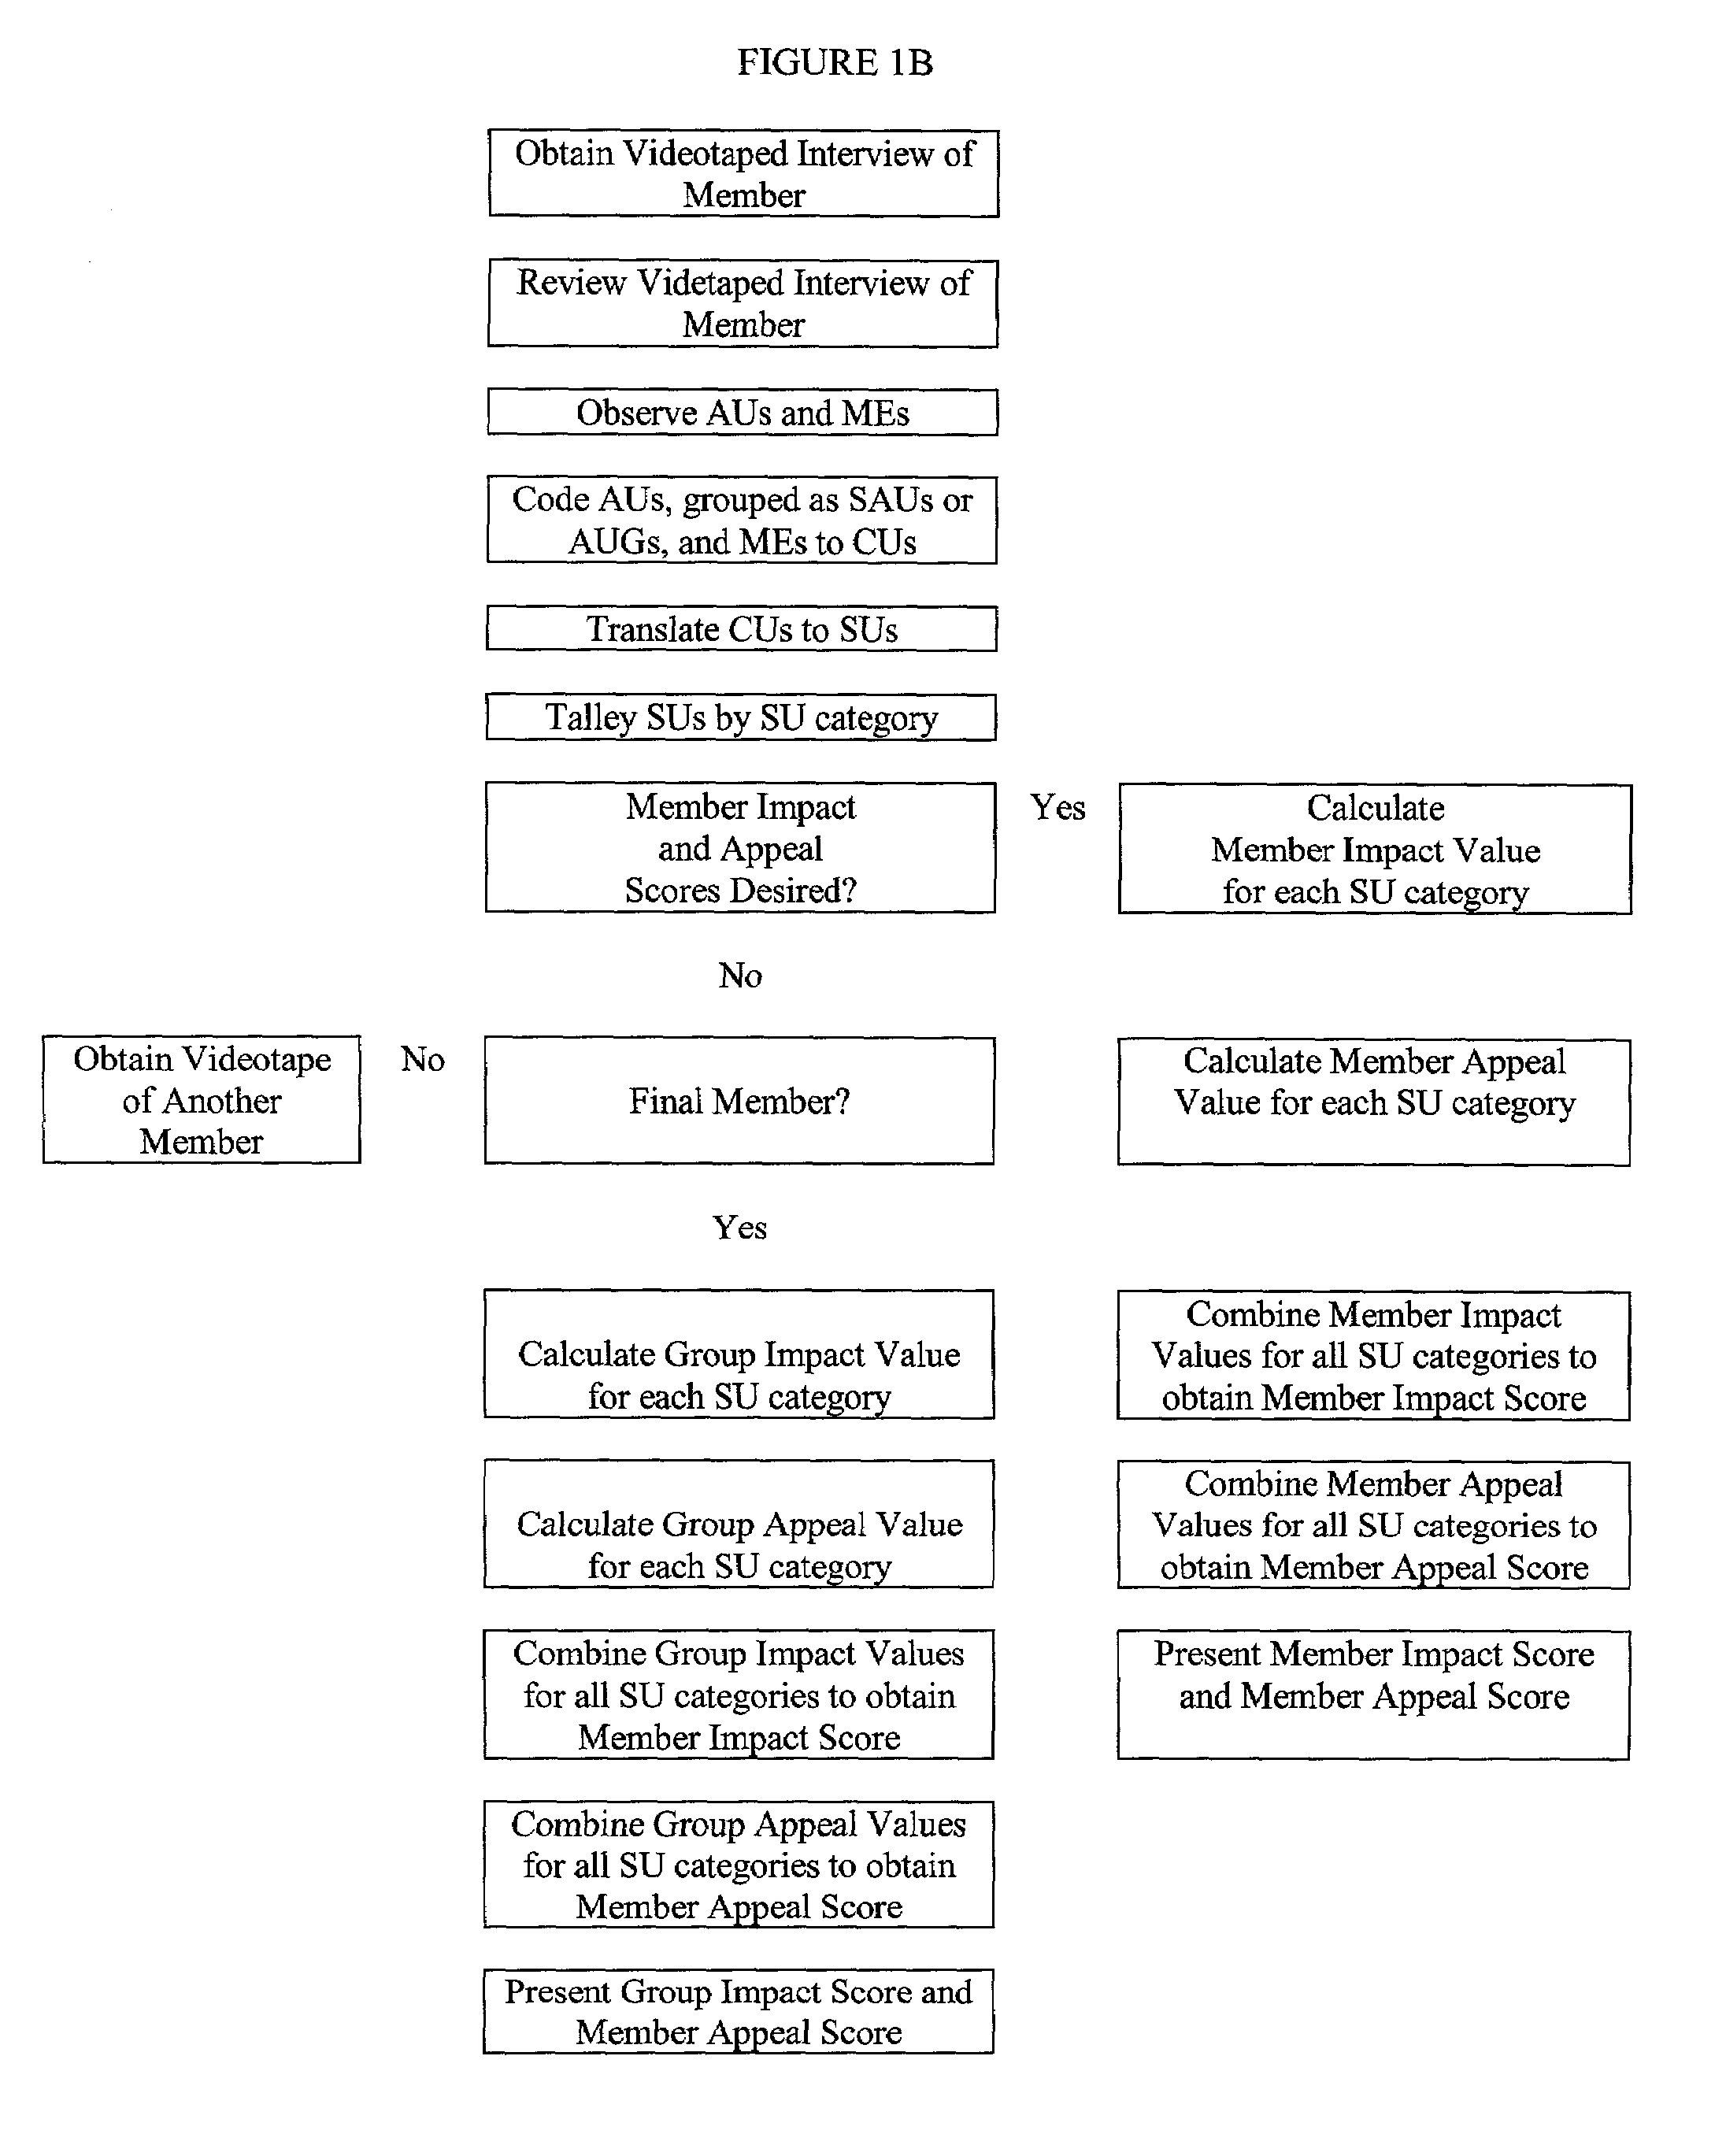 Method of facial coding monitoring for the purpose of gauging the impact and appeal of commercially-related stimuli